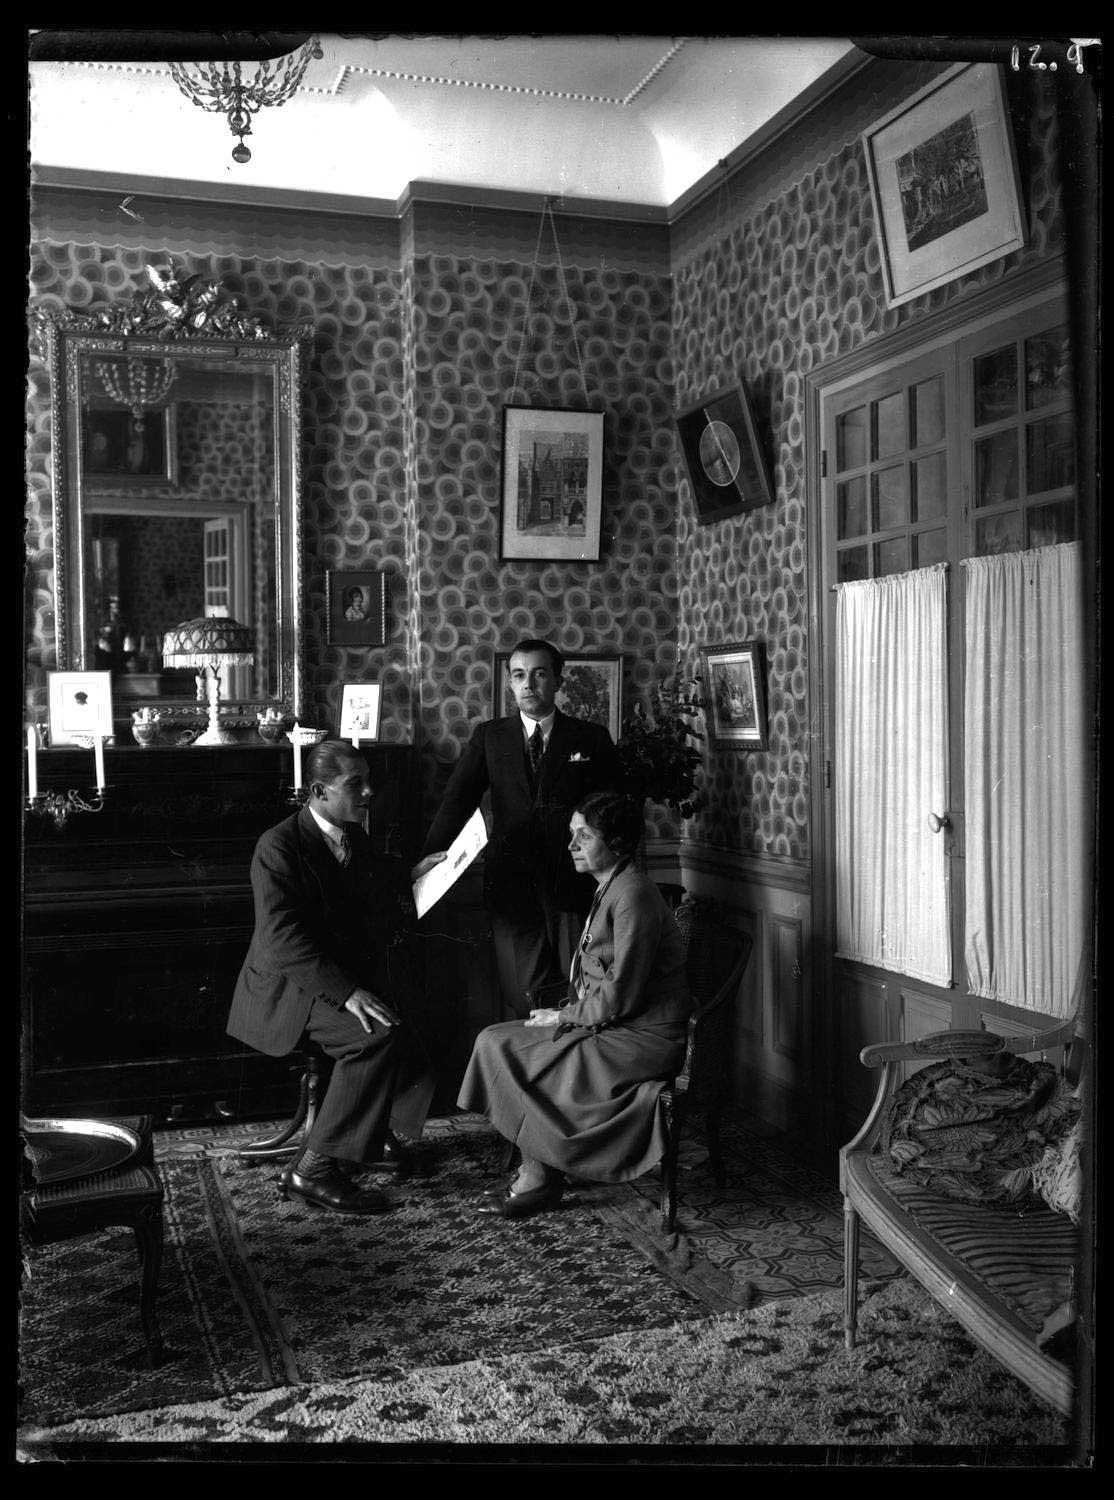 Family portrait of two men and woman in European dress, interior of an elaborately decorated room